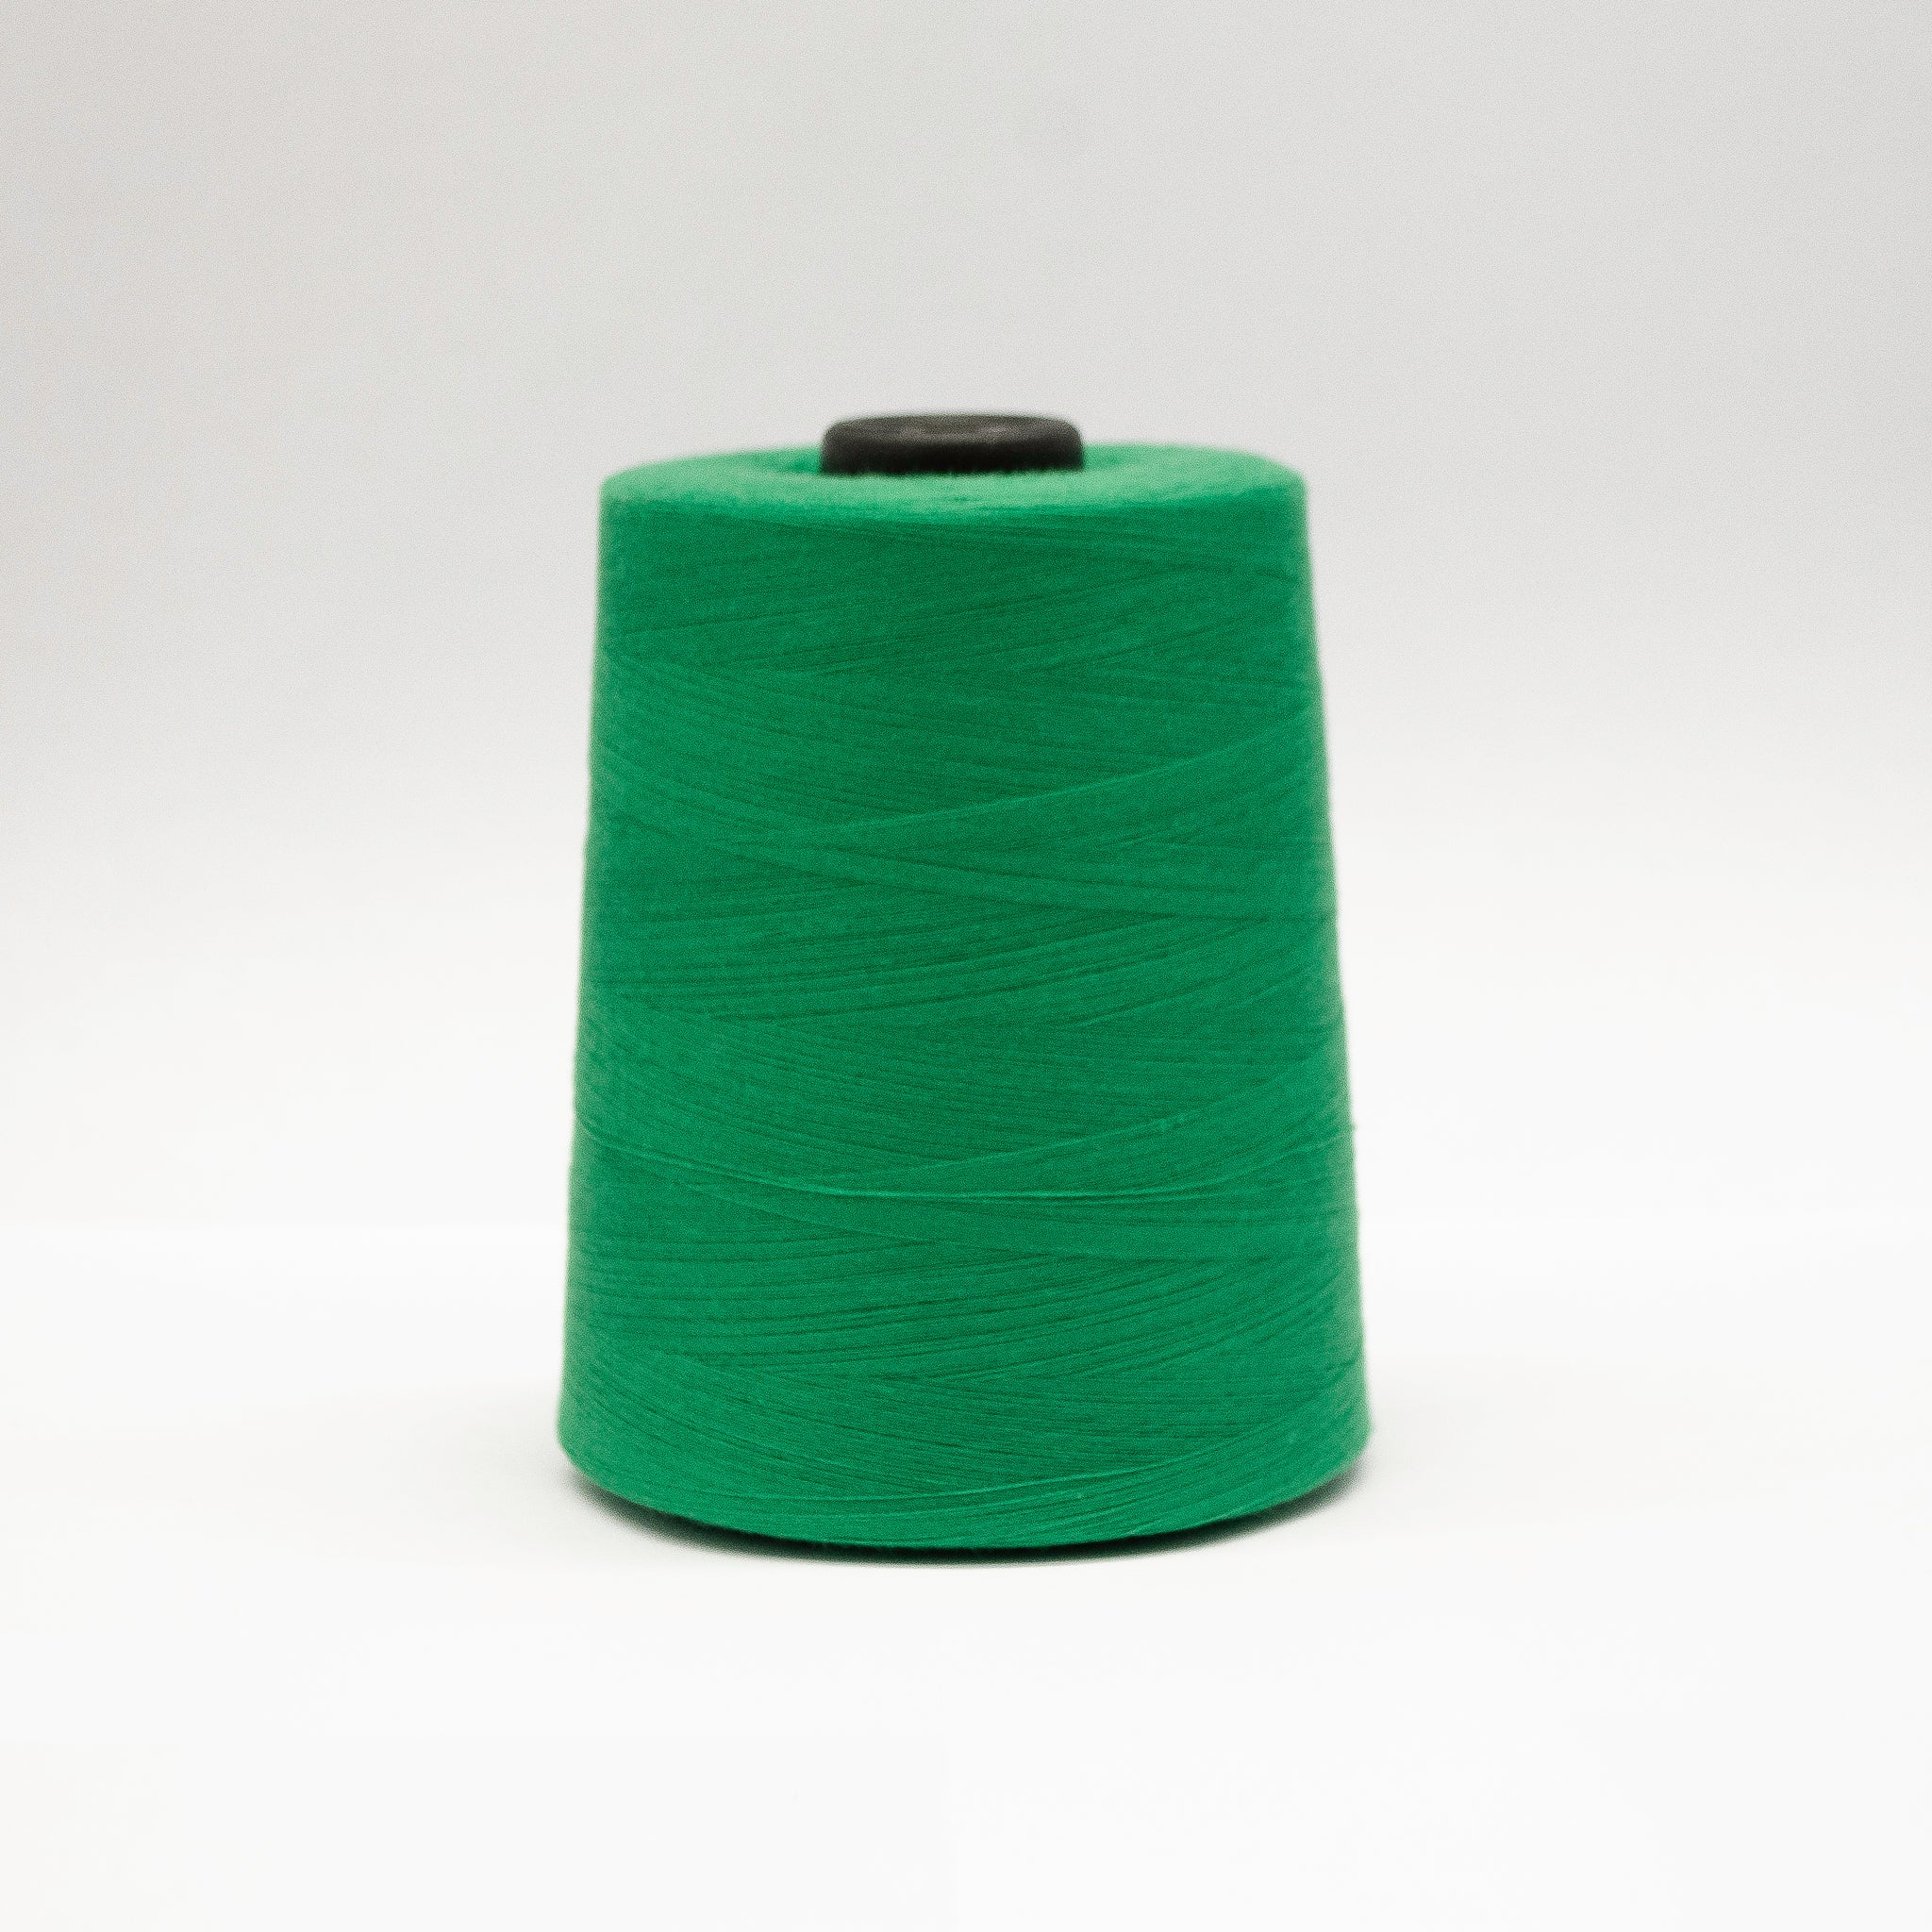  SELCRAFT Polyester Three Thick Sewing Thread Thread